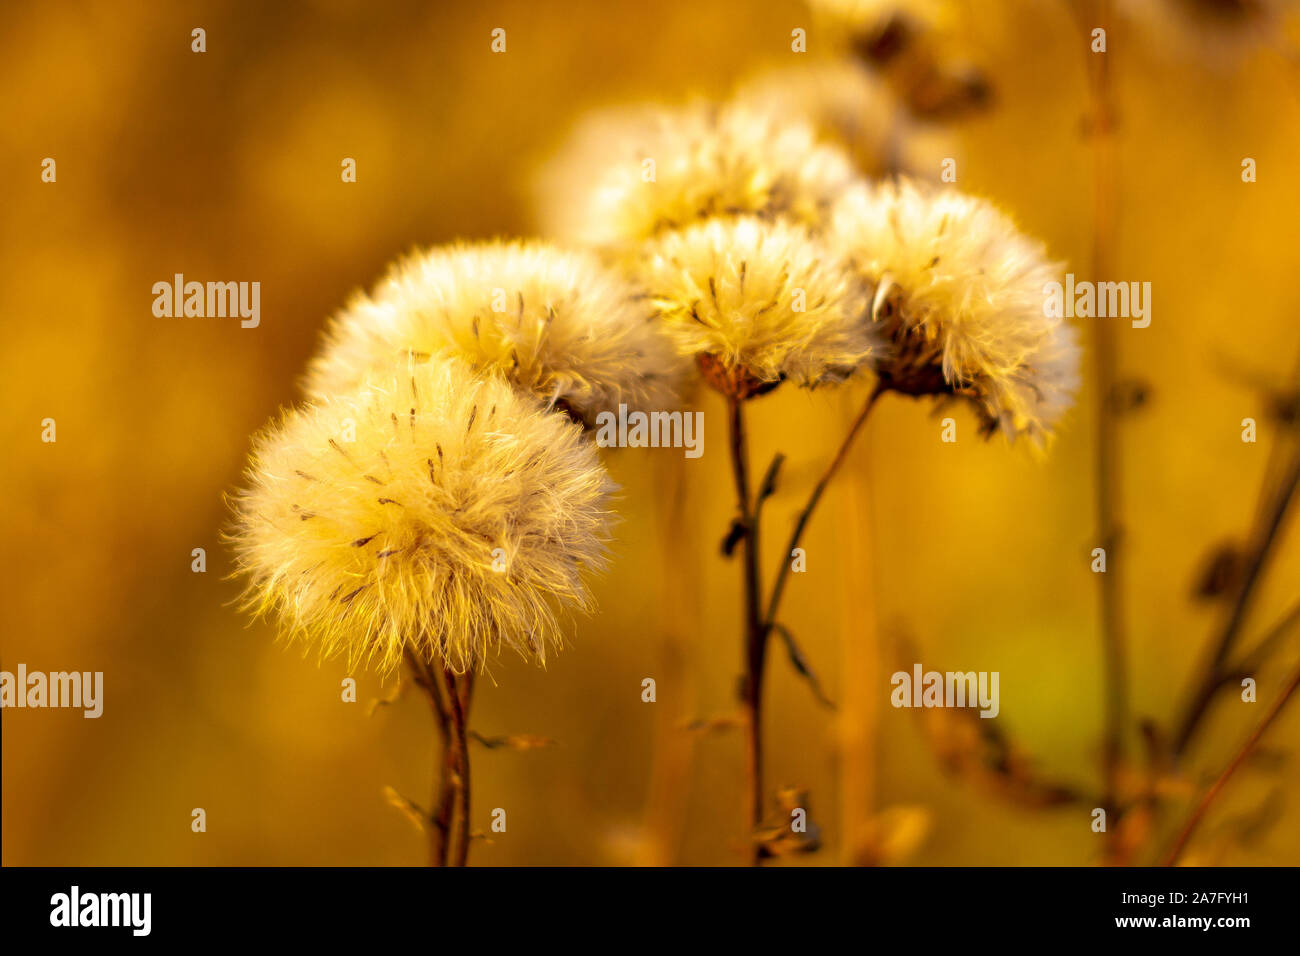 Flowers withered of a plant Greater burdock (Arctium láppa). Autumn Front view. Stock Photo